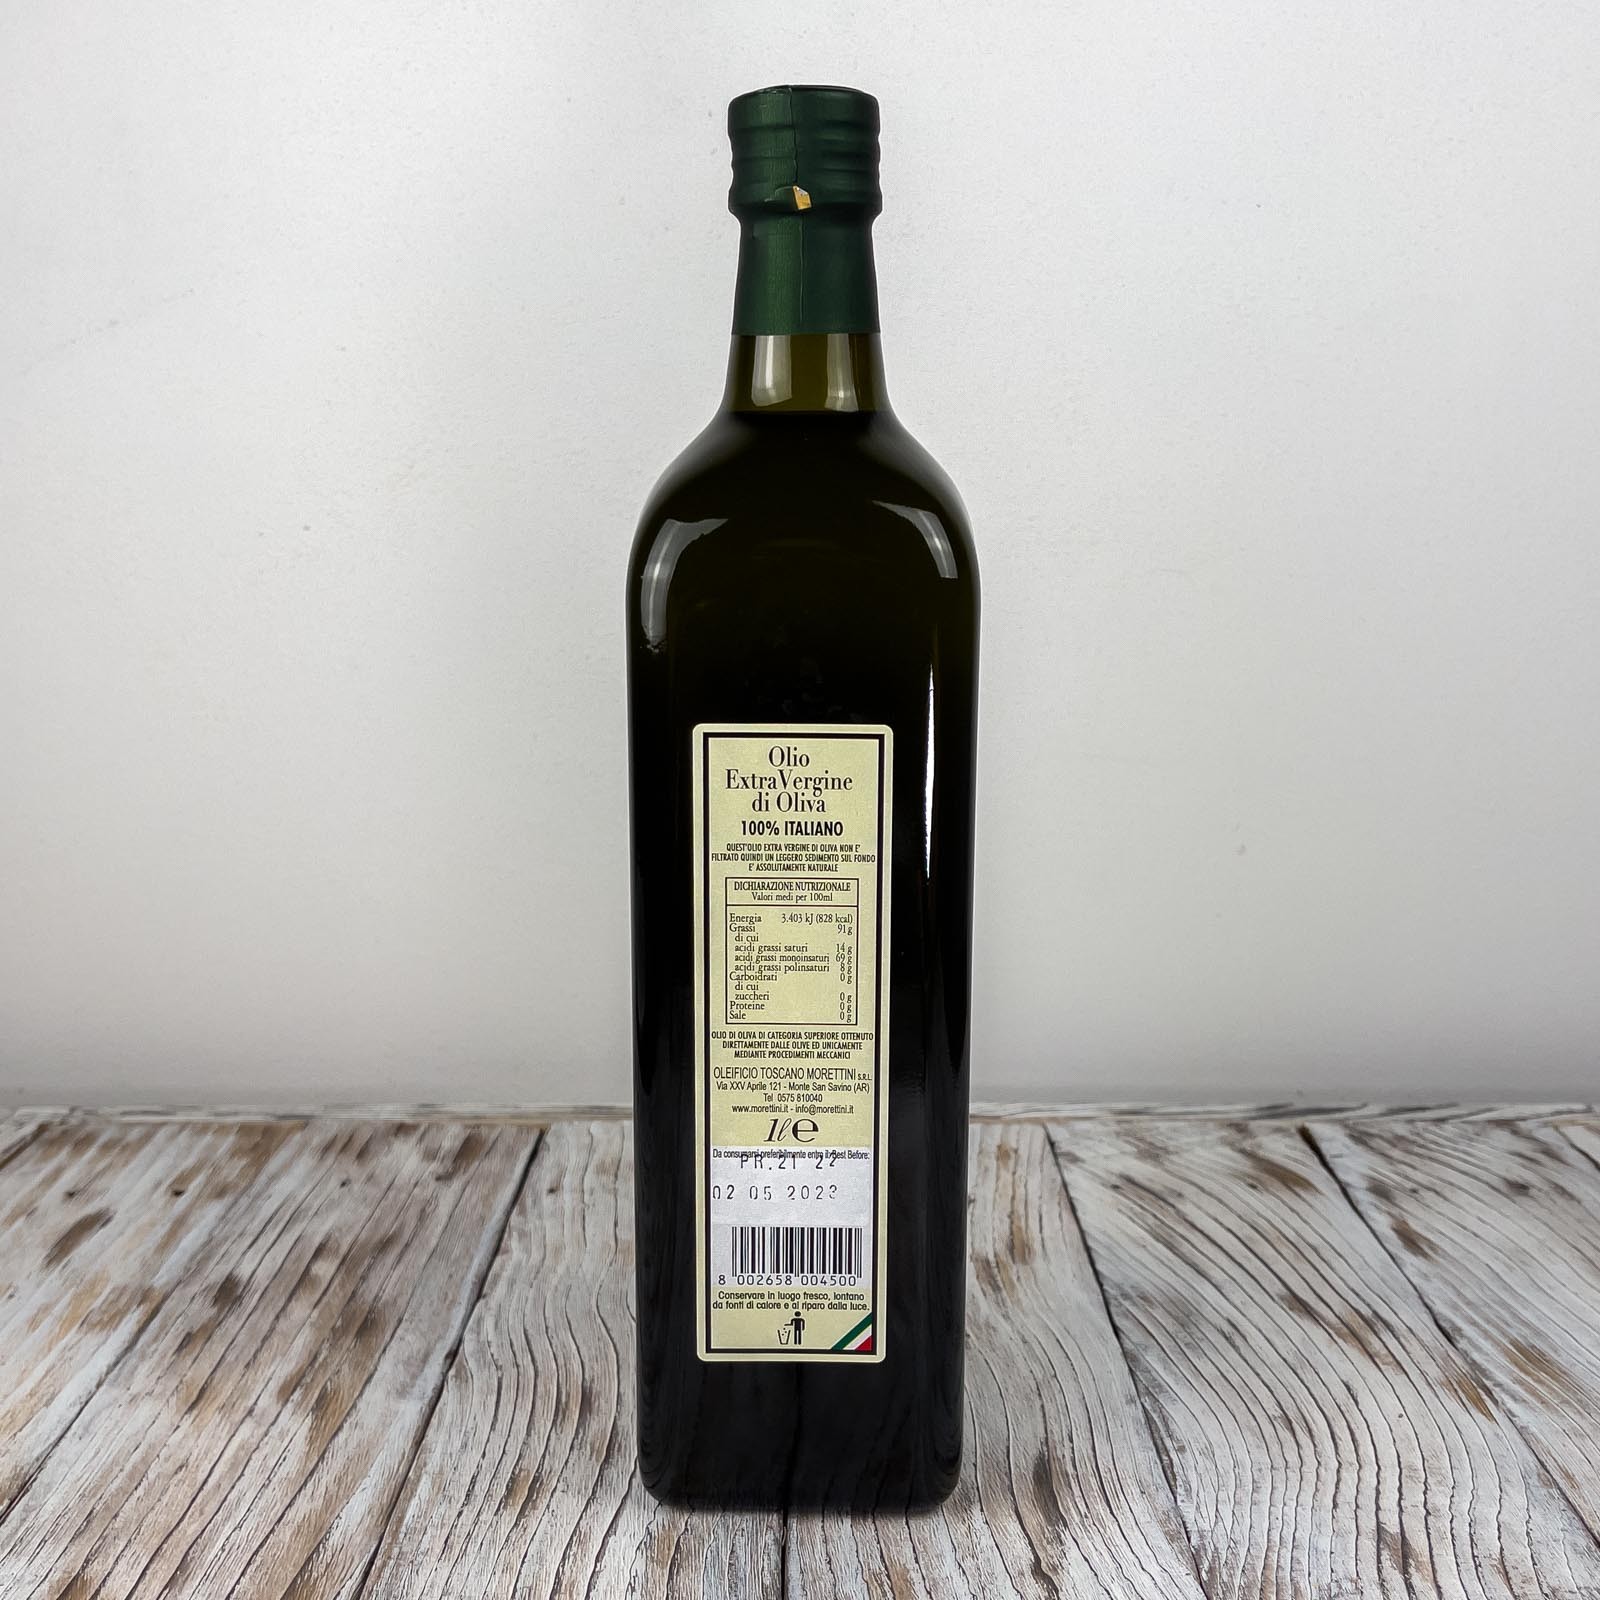 “Il Campo 100% Italiano”, extra virgin olive oil, produced with the method of cold processing of olives harvested and pressed in Italy - Year of production 2021/2022.